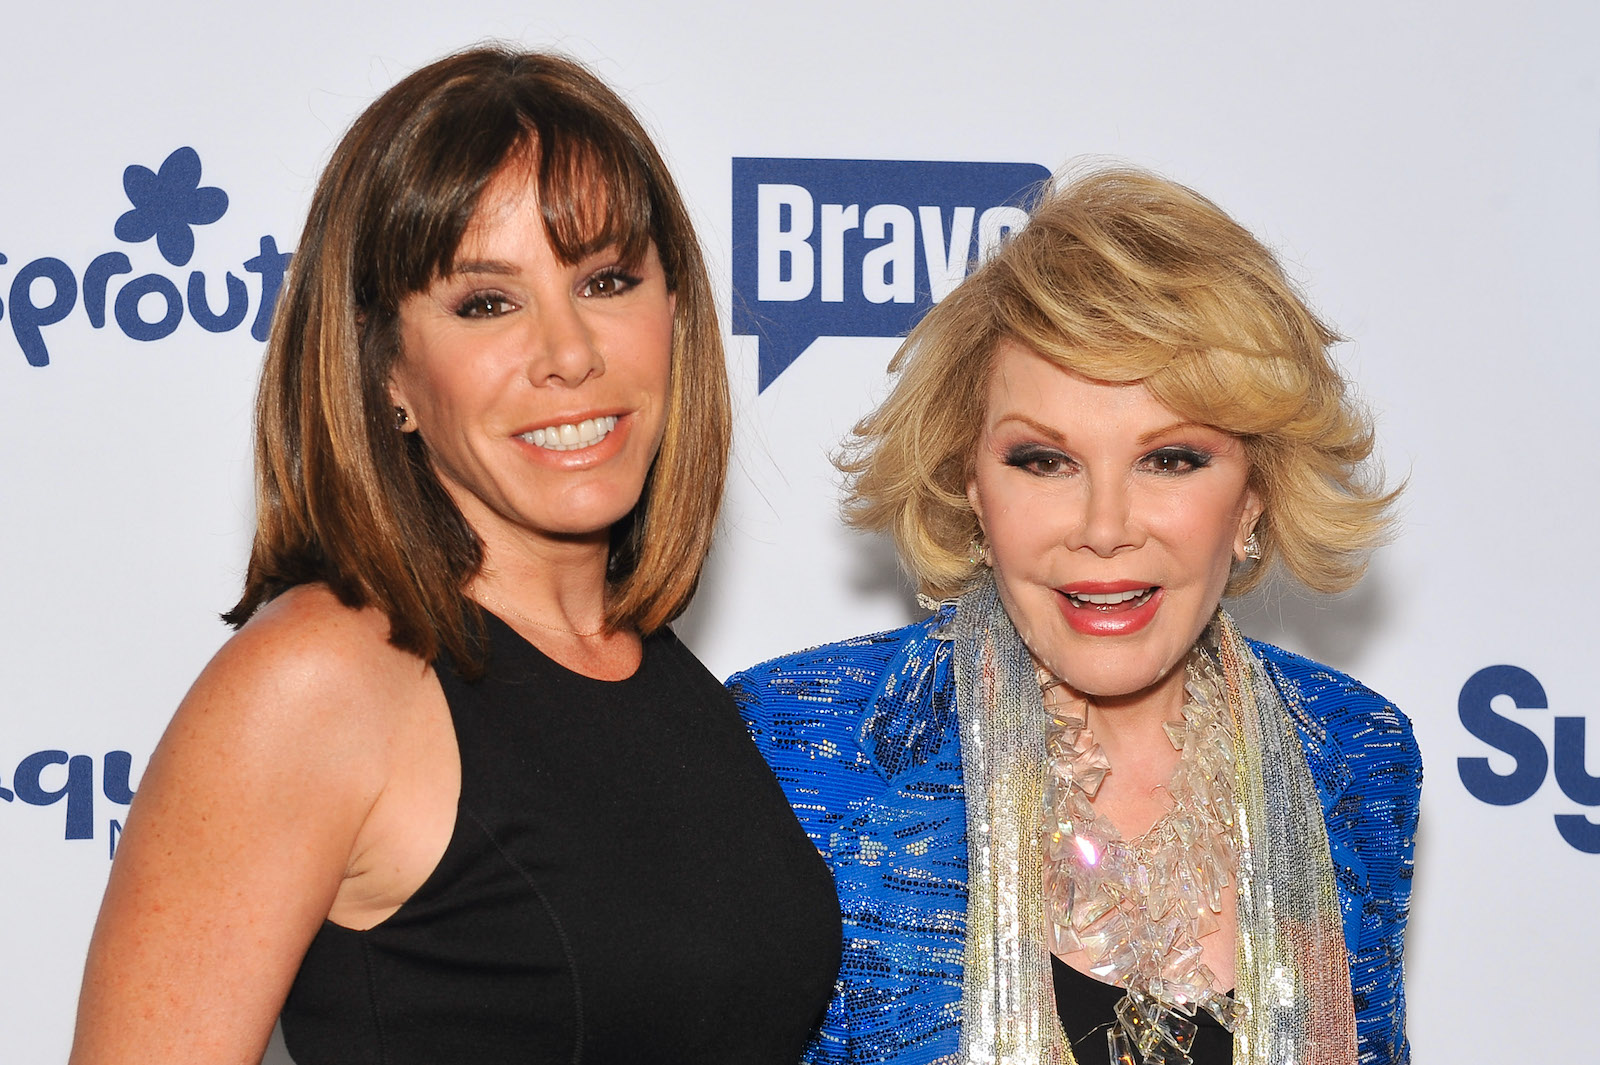 Joan Rivers and Melissa Rivers smile on the step and repeat at an event in 2014